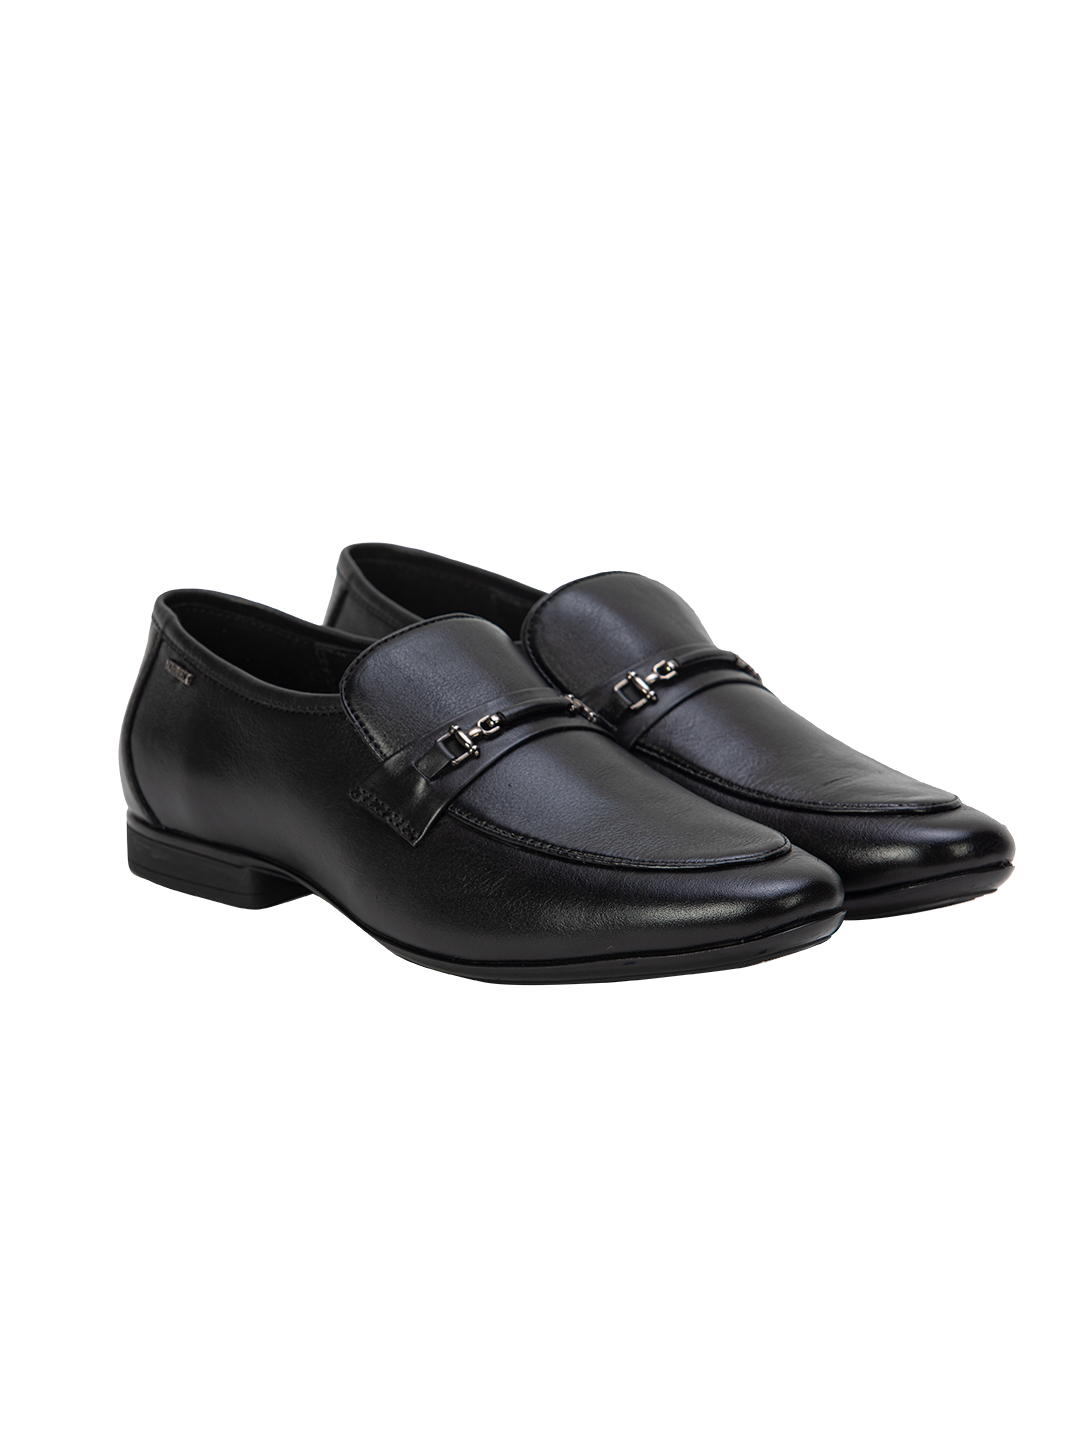 Buy Von Wellx Germany Comfort Black Glib Shoes Online in Colombo